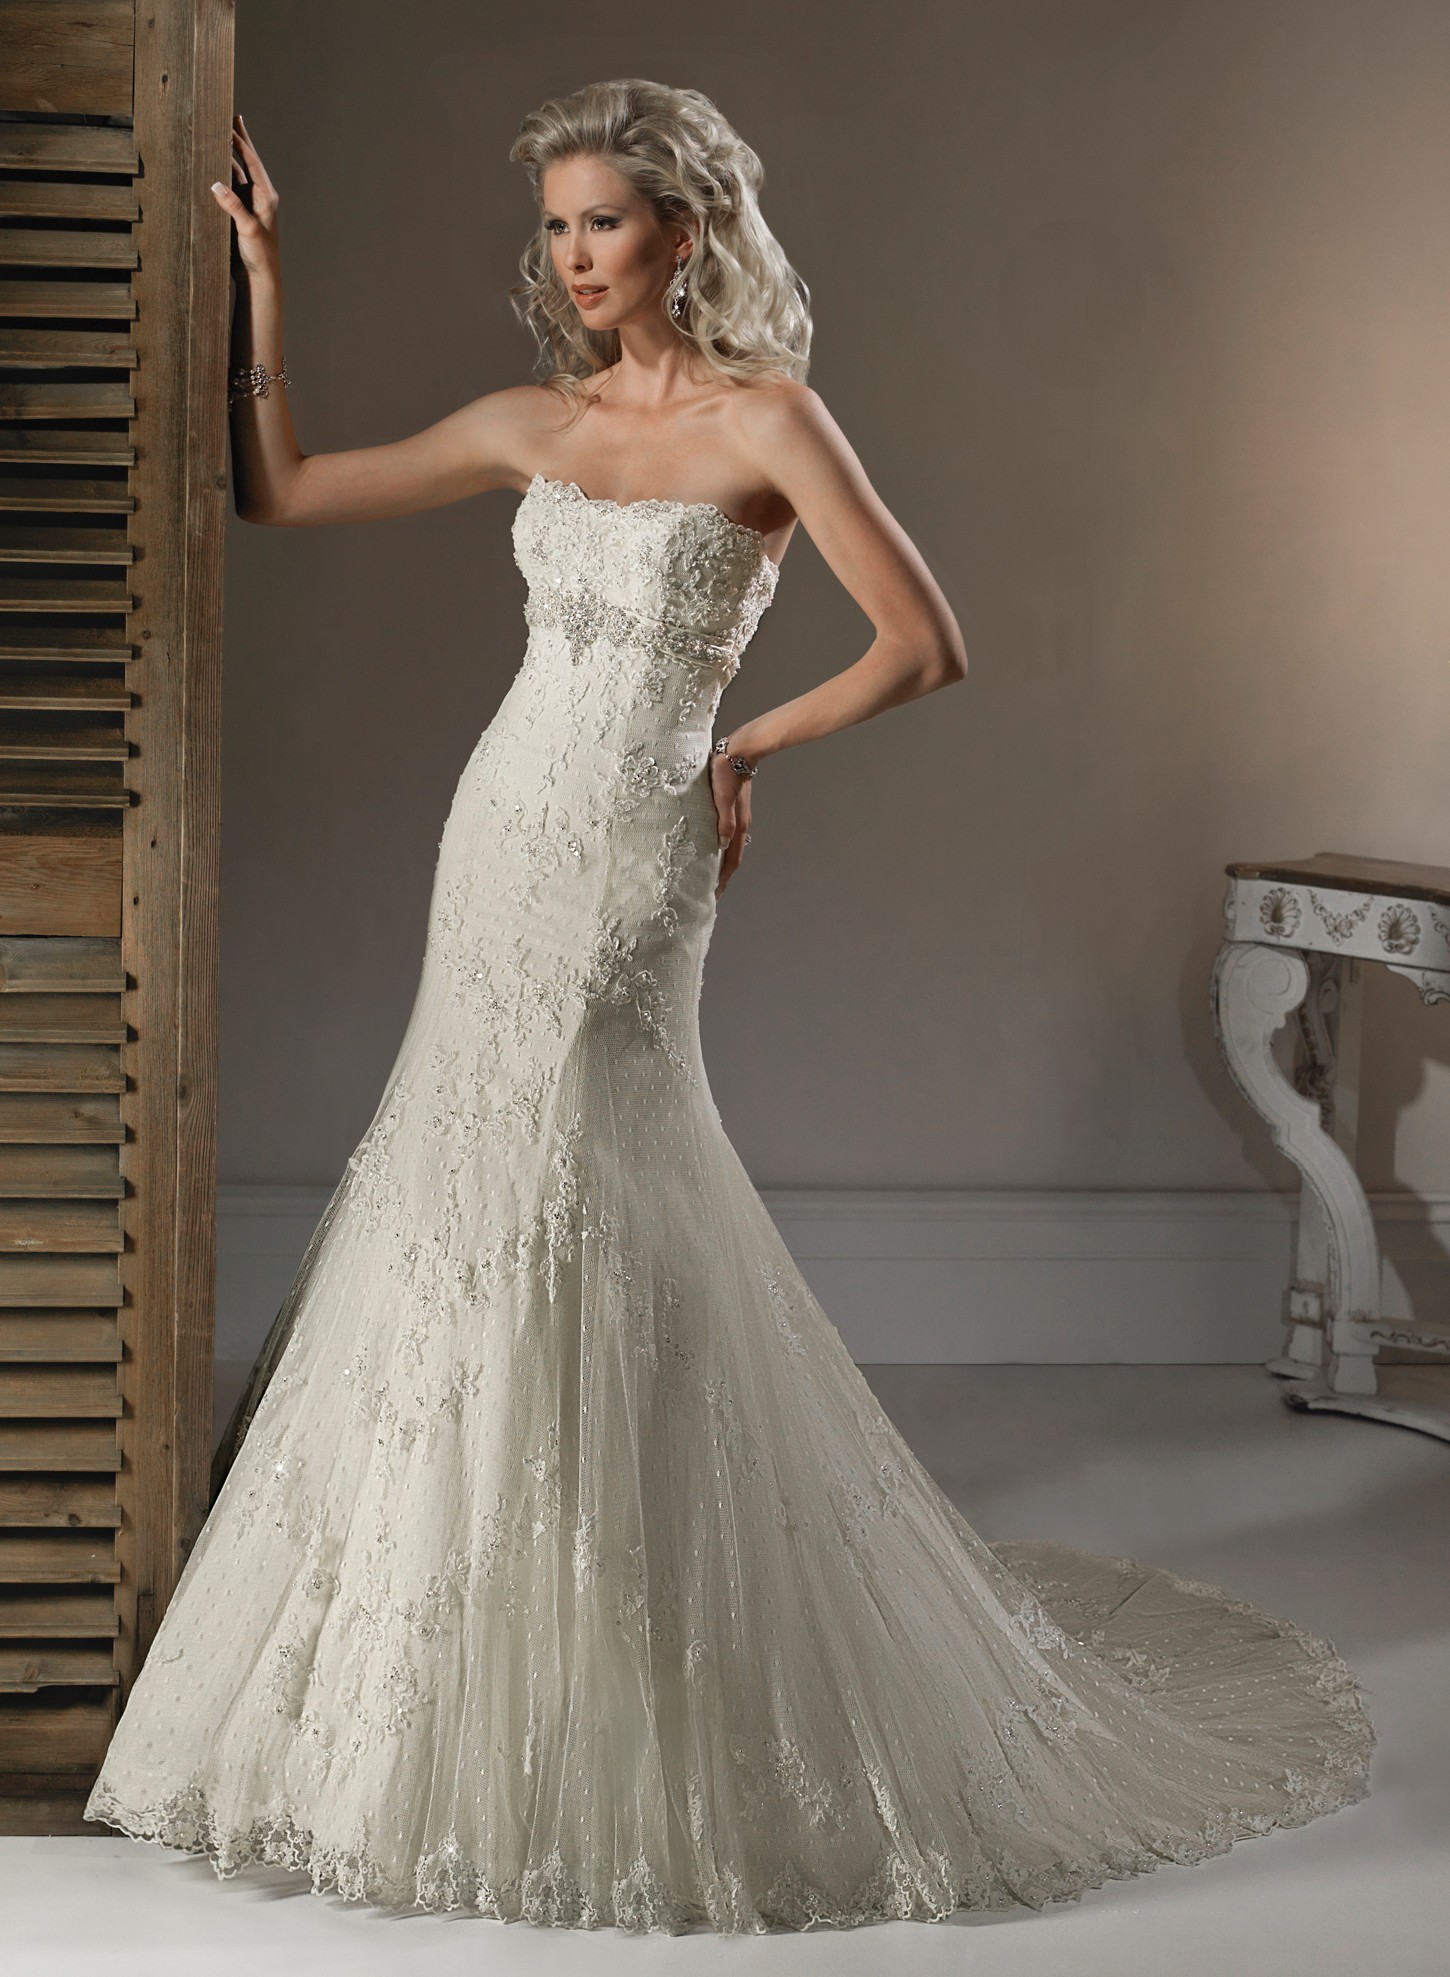 Get Intrigued With A Line Wedding Dresses - Ohh My My